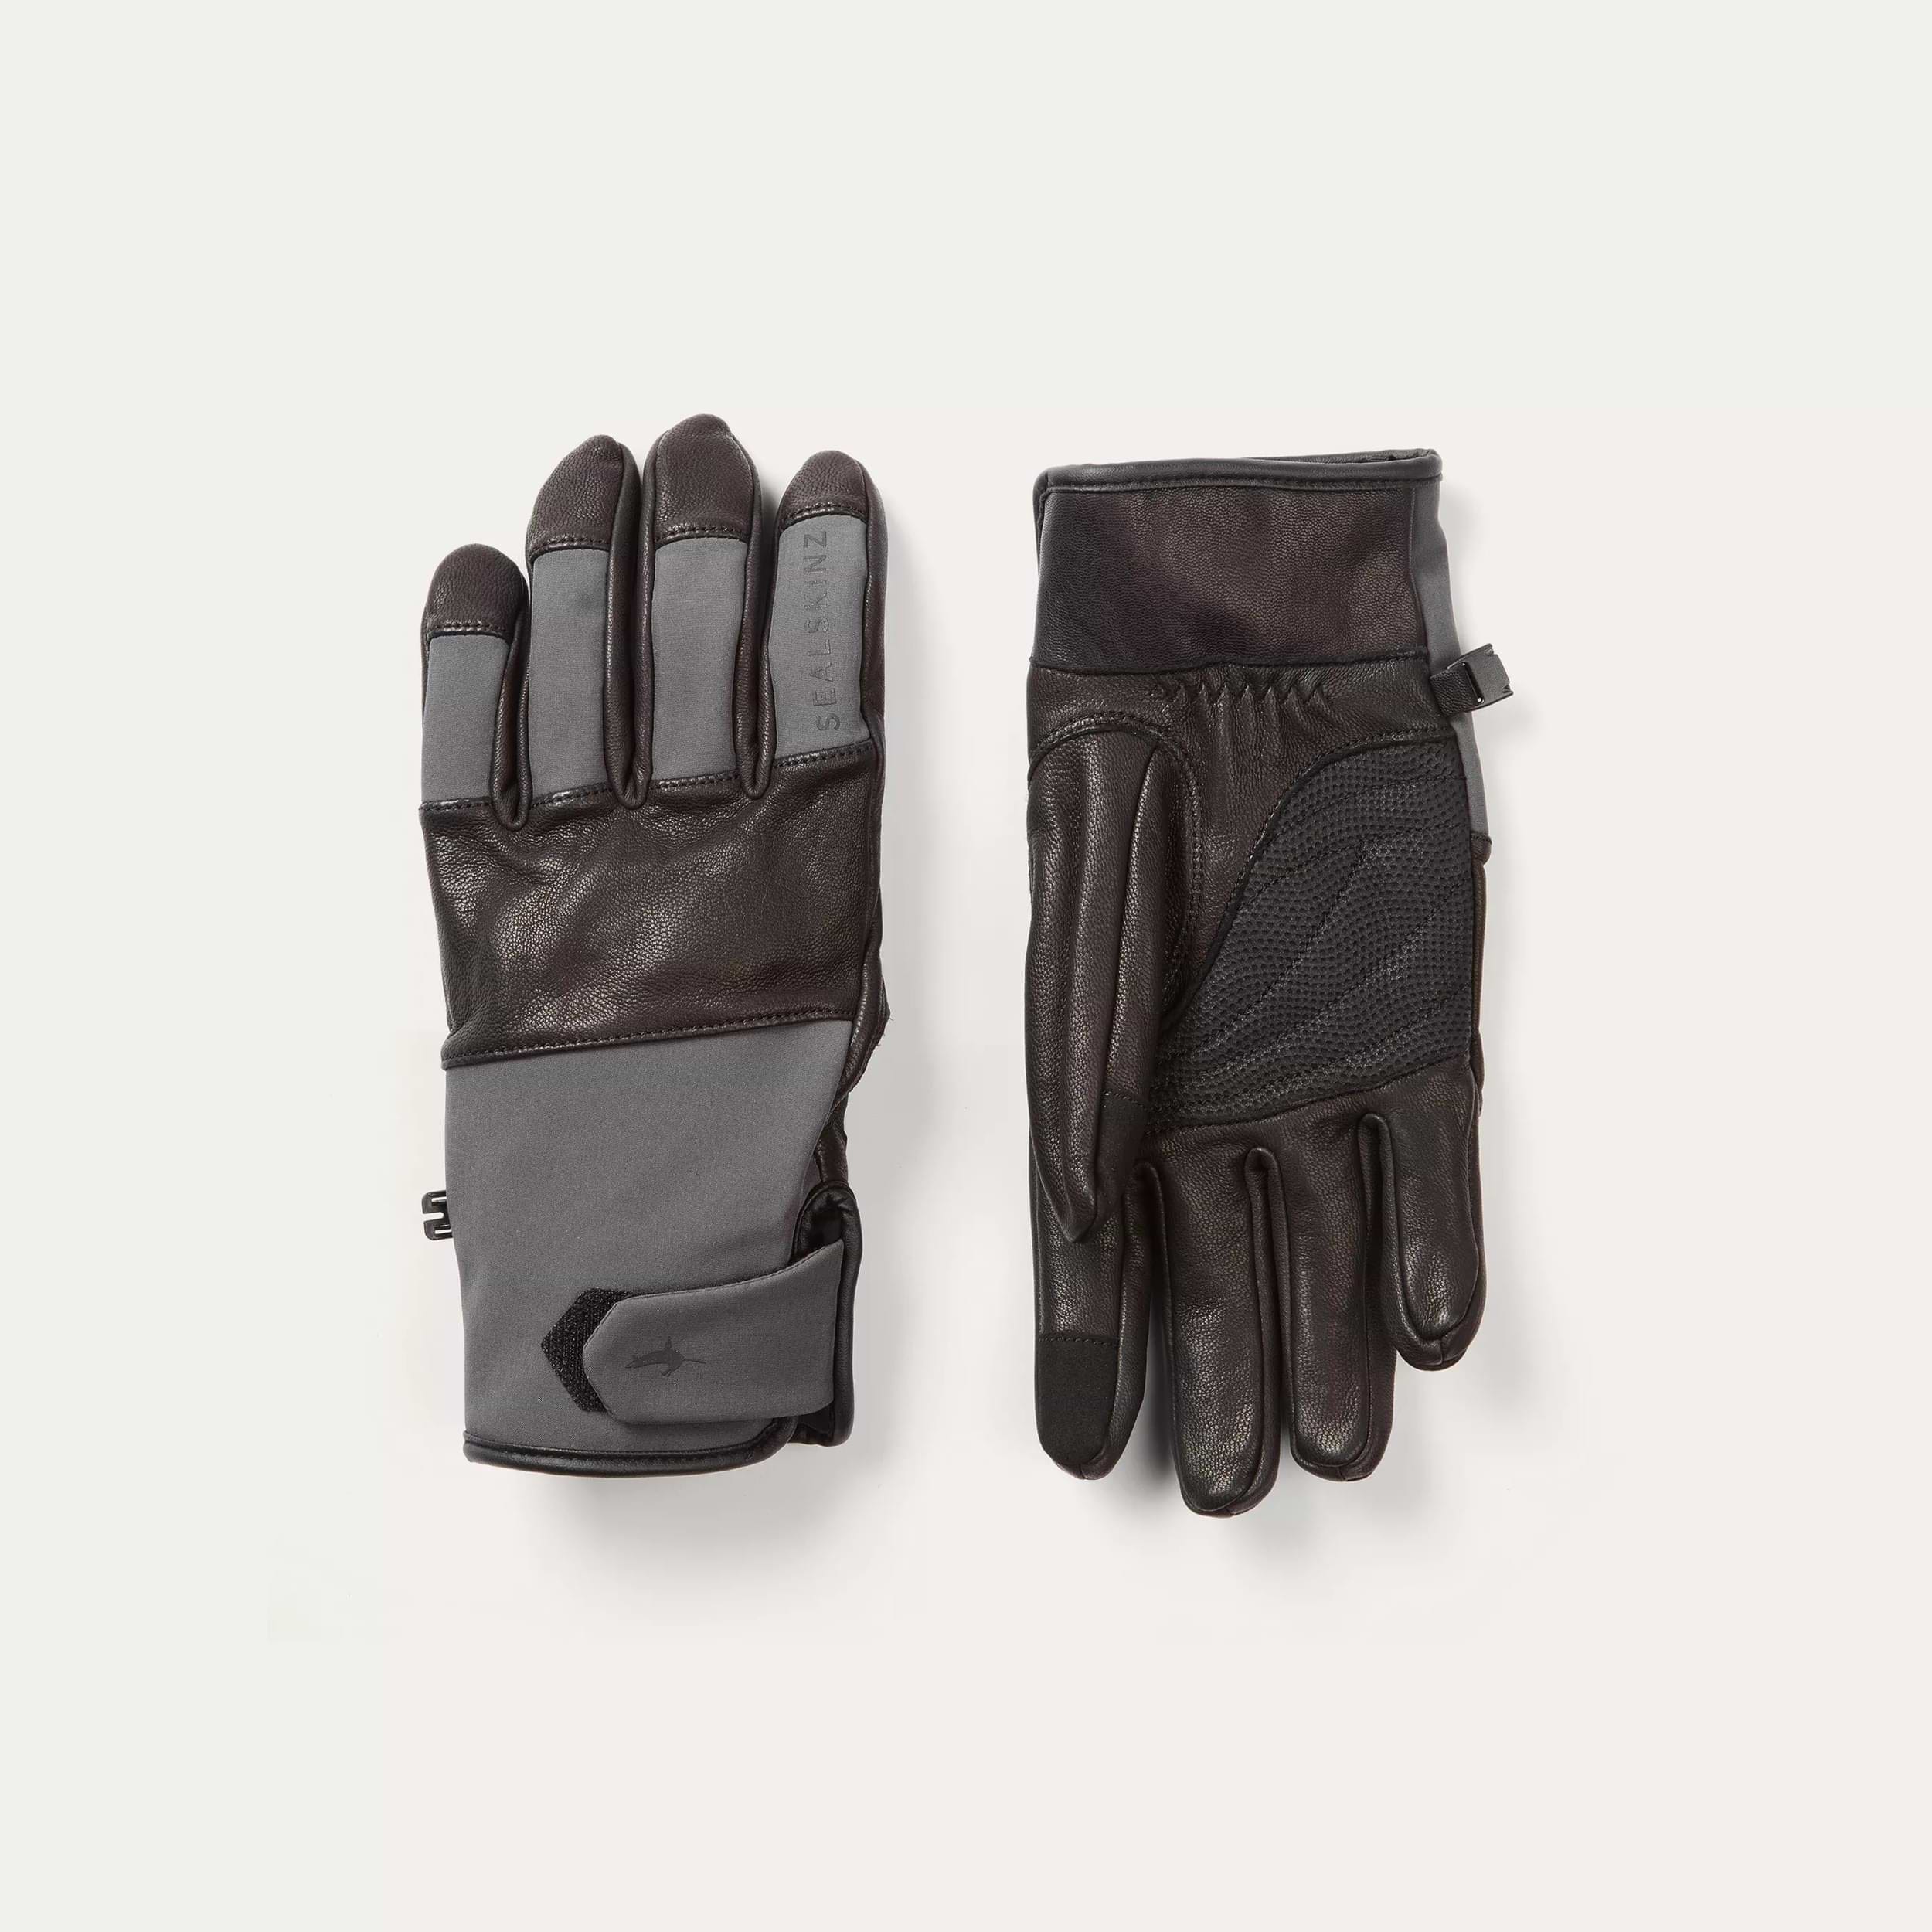 TFO Cold Weather Glove, Gear